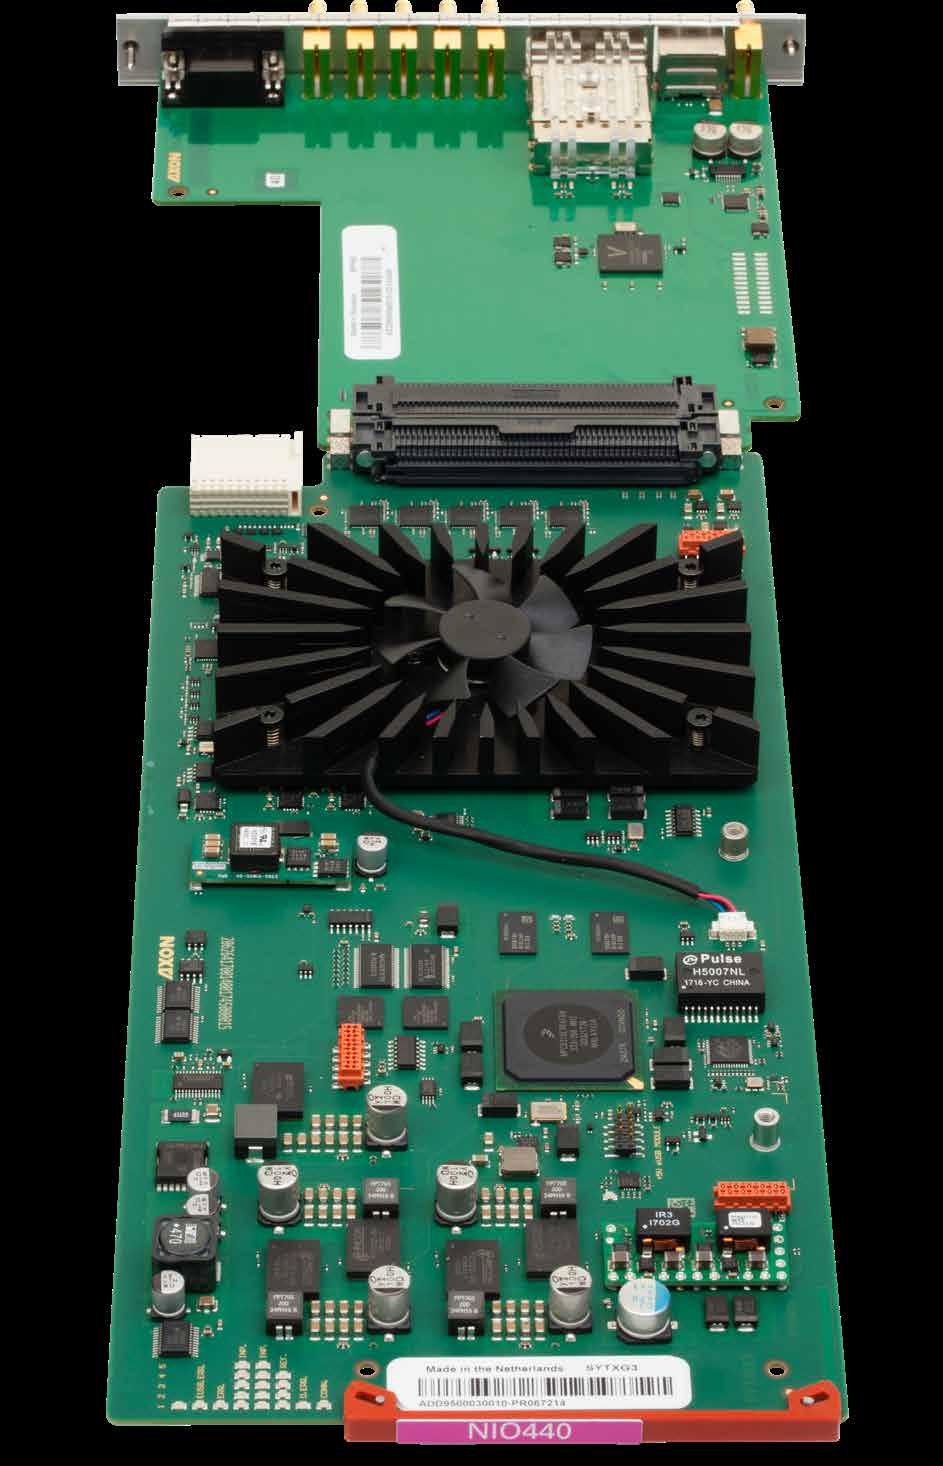 A brief technical description of the basic elements and how they are constructed: The processing cards connect directly into the frame via a high density connector that powers the cards with a single